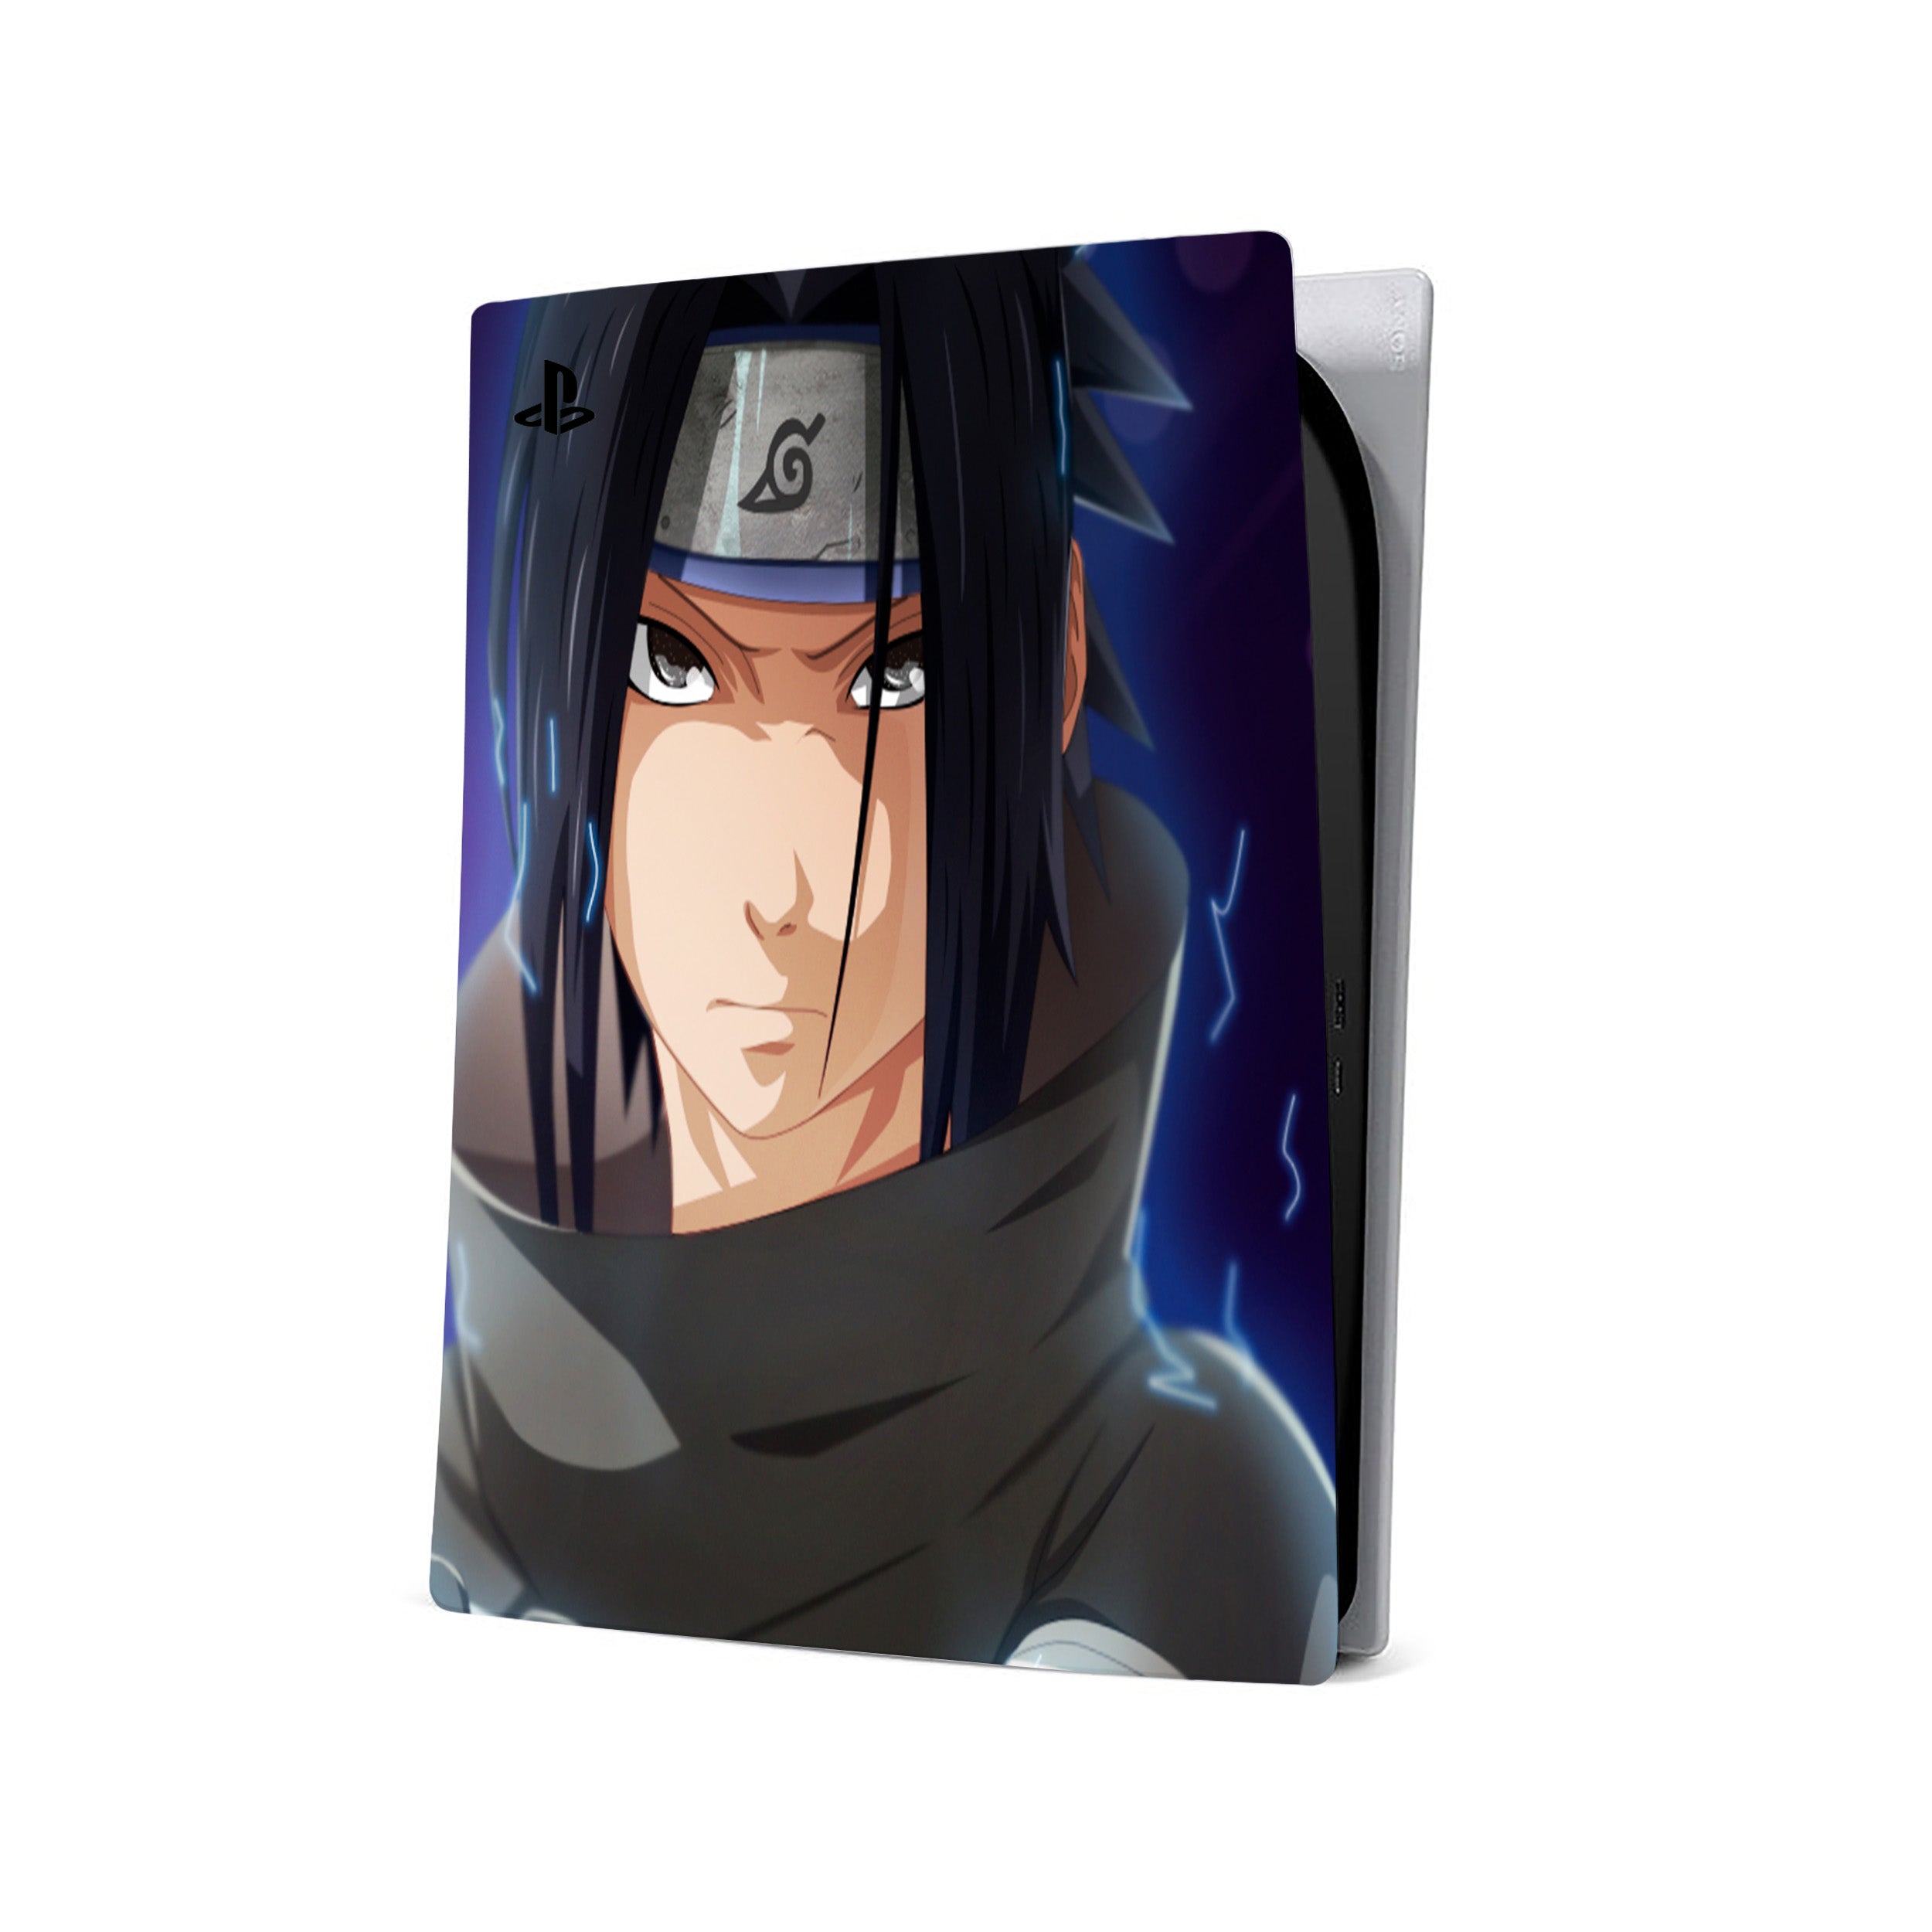 A video game skin featuring a Naruto Sasuke design for the PS5.